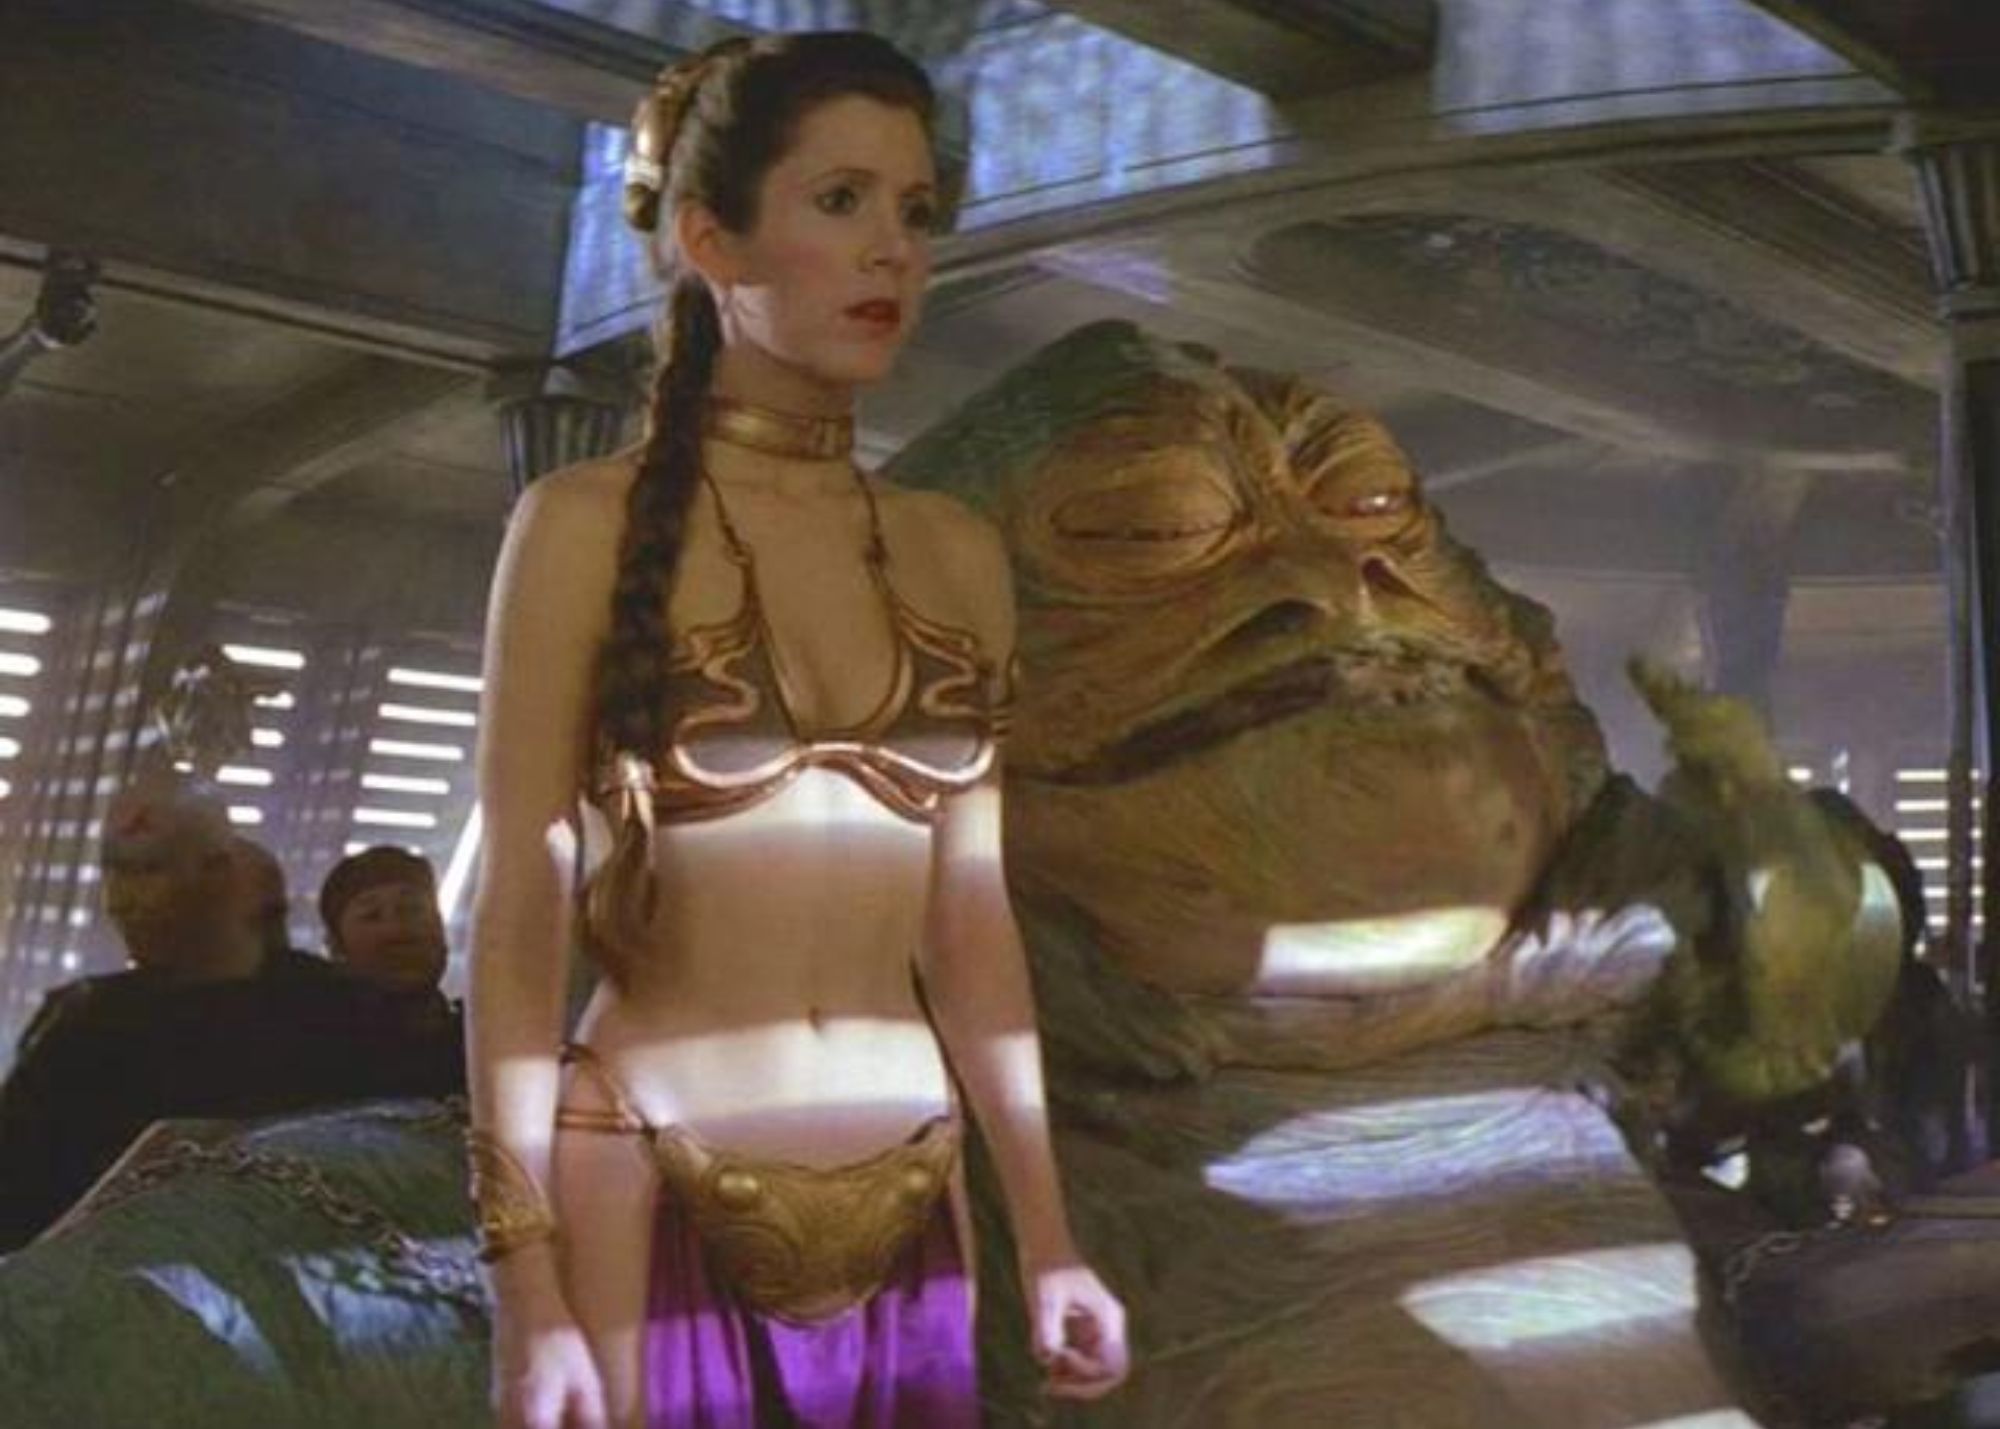 Princess Leia's slave bikini is characterized by a metal bikini and violet-colored fabrics that cover her private area